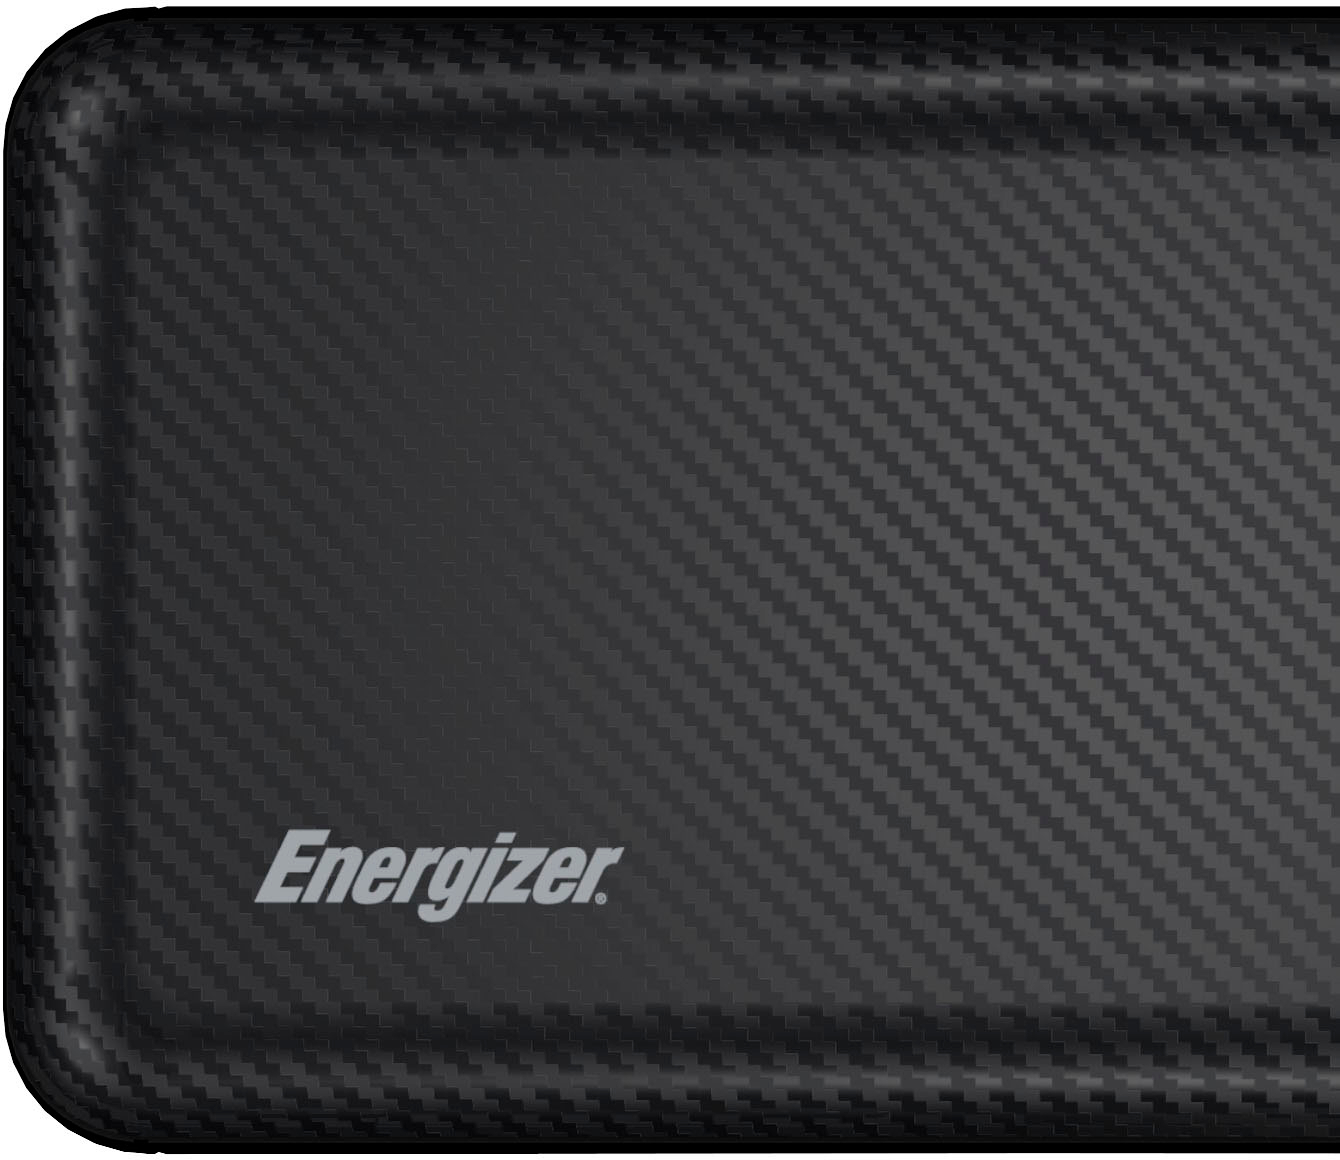 Angle View: Energizer - MAX 30,000mAh 15W USB-C 3-Port Universal Portable Battery Charger/Power Bank w/ LCD screen for Smartphones & Accessories - Black